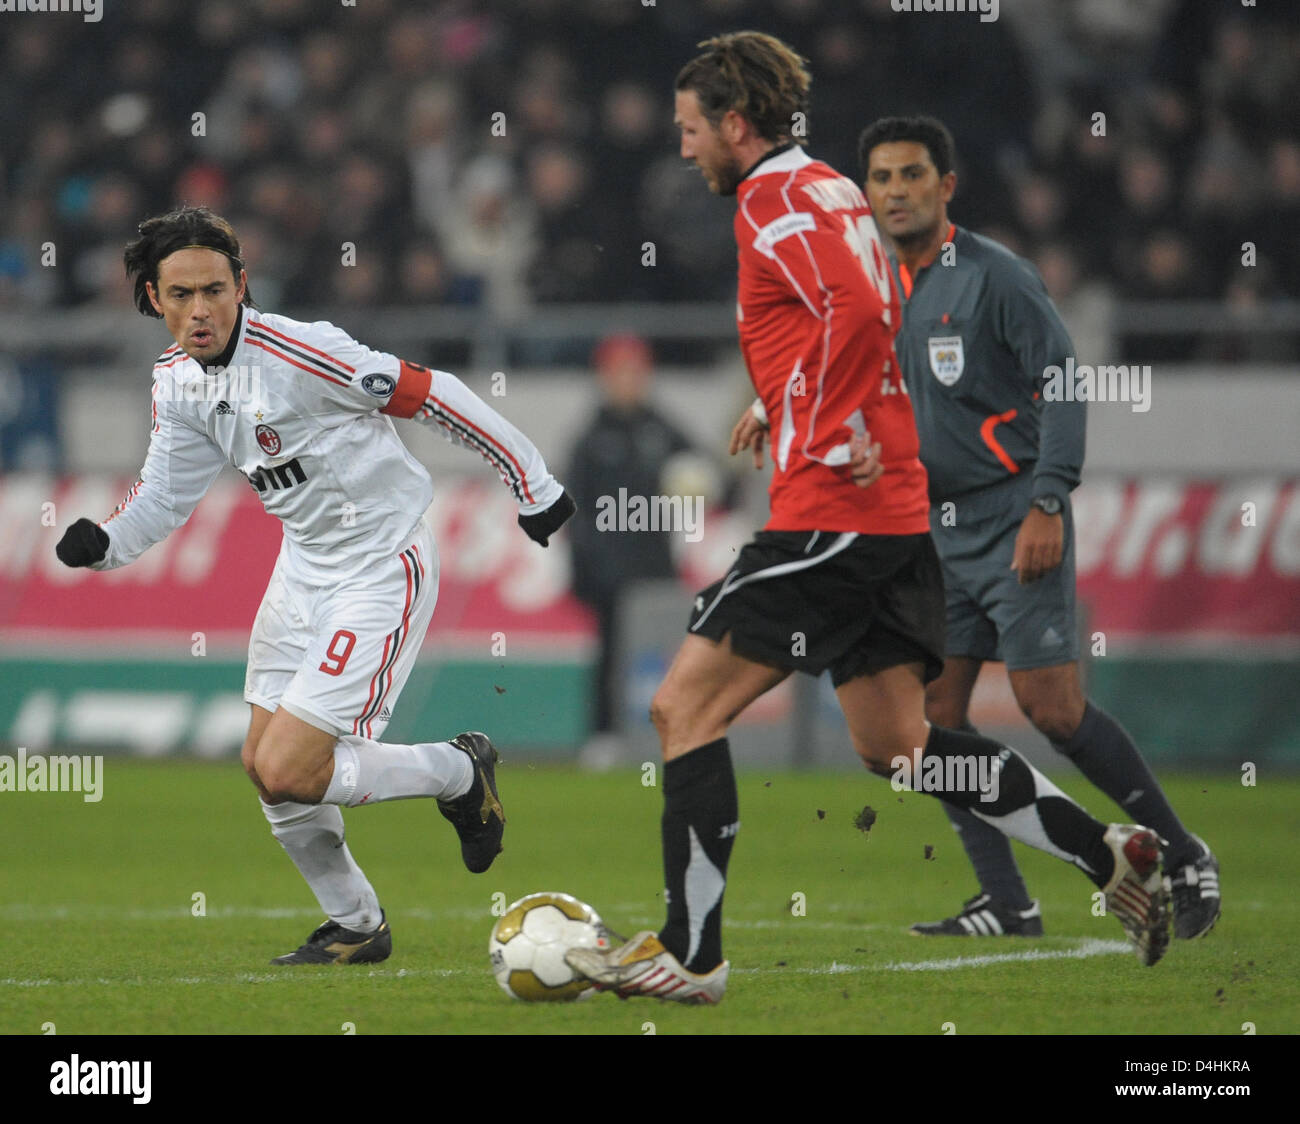 Hanover?s Christian Schulz (R) vies for the ball with Milan?s Filippo Inzaghi during the soccer friendly between German Bundesliga club Hanover 96 and Italian Serie A club AC Milan at AWD-Arena in Hanover, Germany, 21 January 2009. AC Milan defeated Hanover 3-2. Photo: Peter Steffen Stock Photo